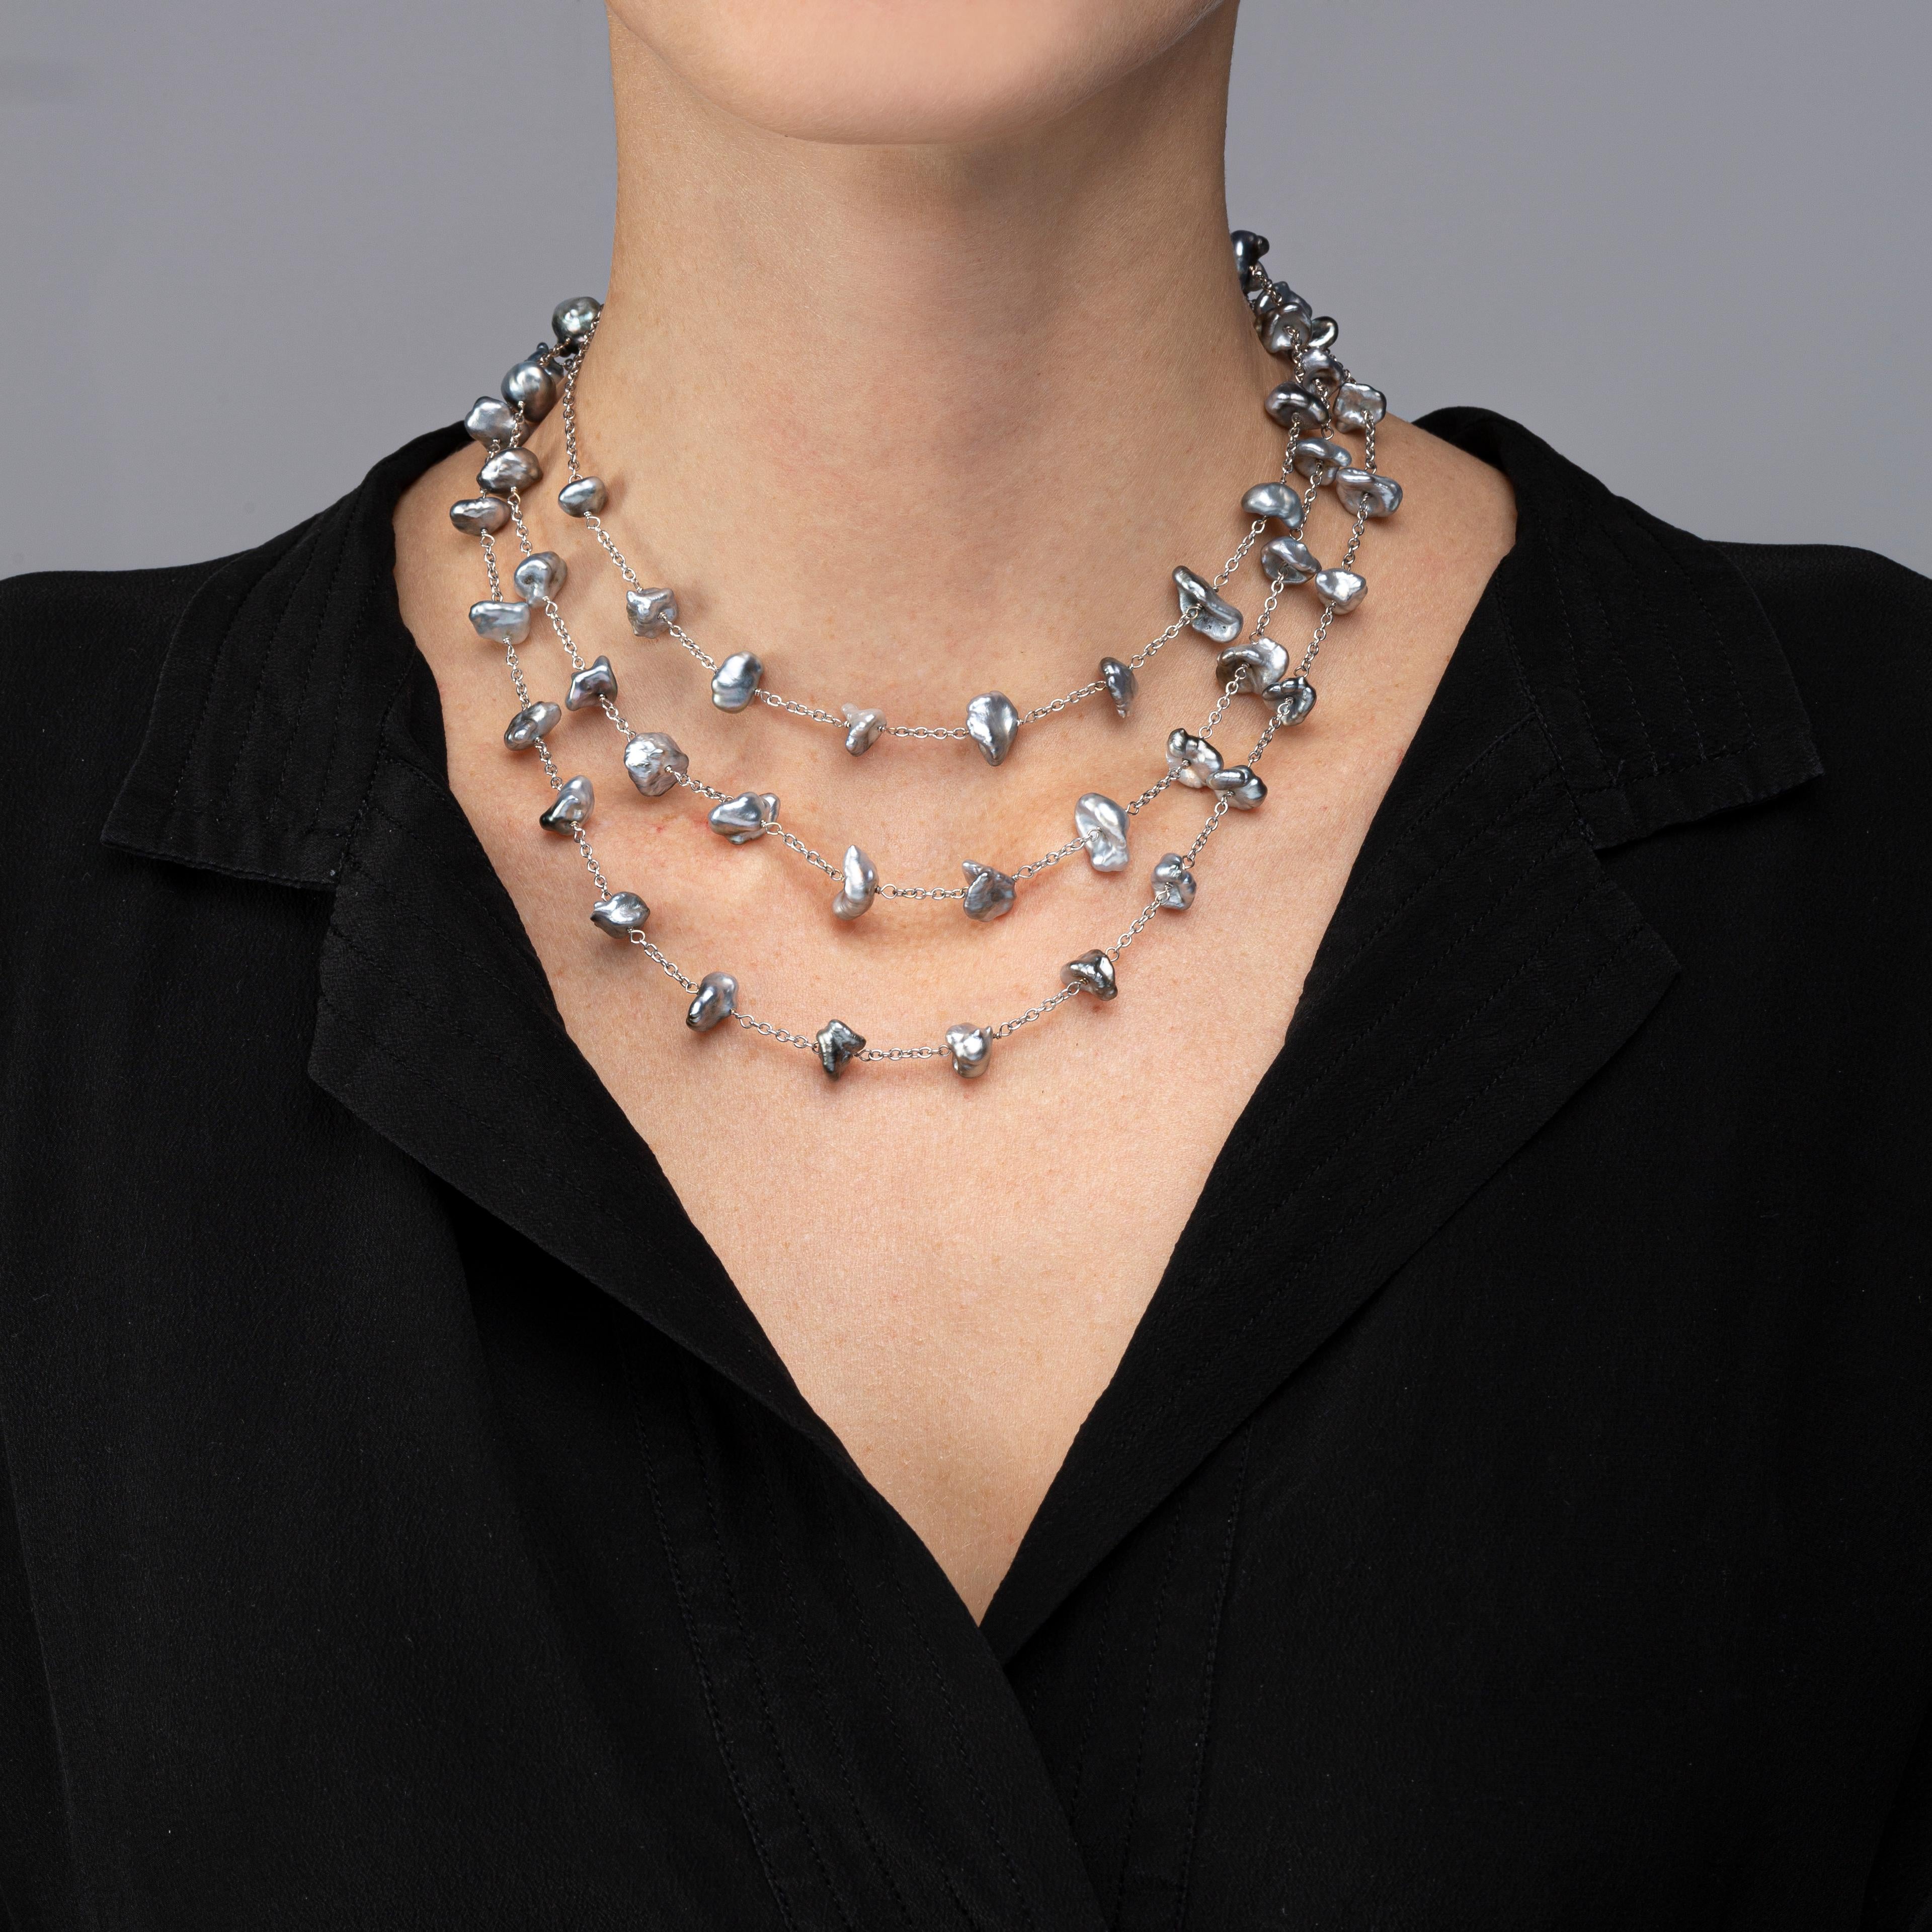 Alex Jona design collection, hand crafted in Italy, 18 karat white gold, 51.18 in /130 cm long sautoir necklace featuring 59 keshi light grey Tahiti pearls.

Alex Jona jewels stand out, not only for their special design and for the excellent quality